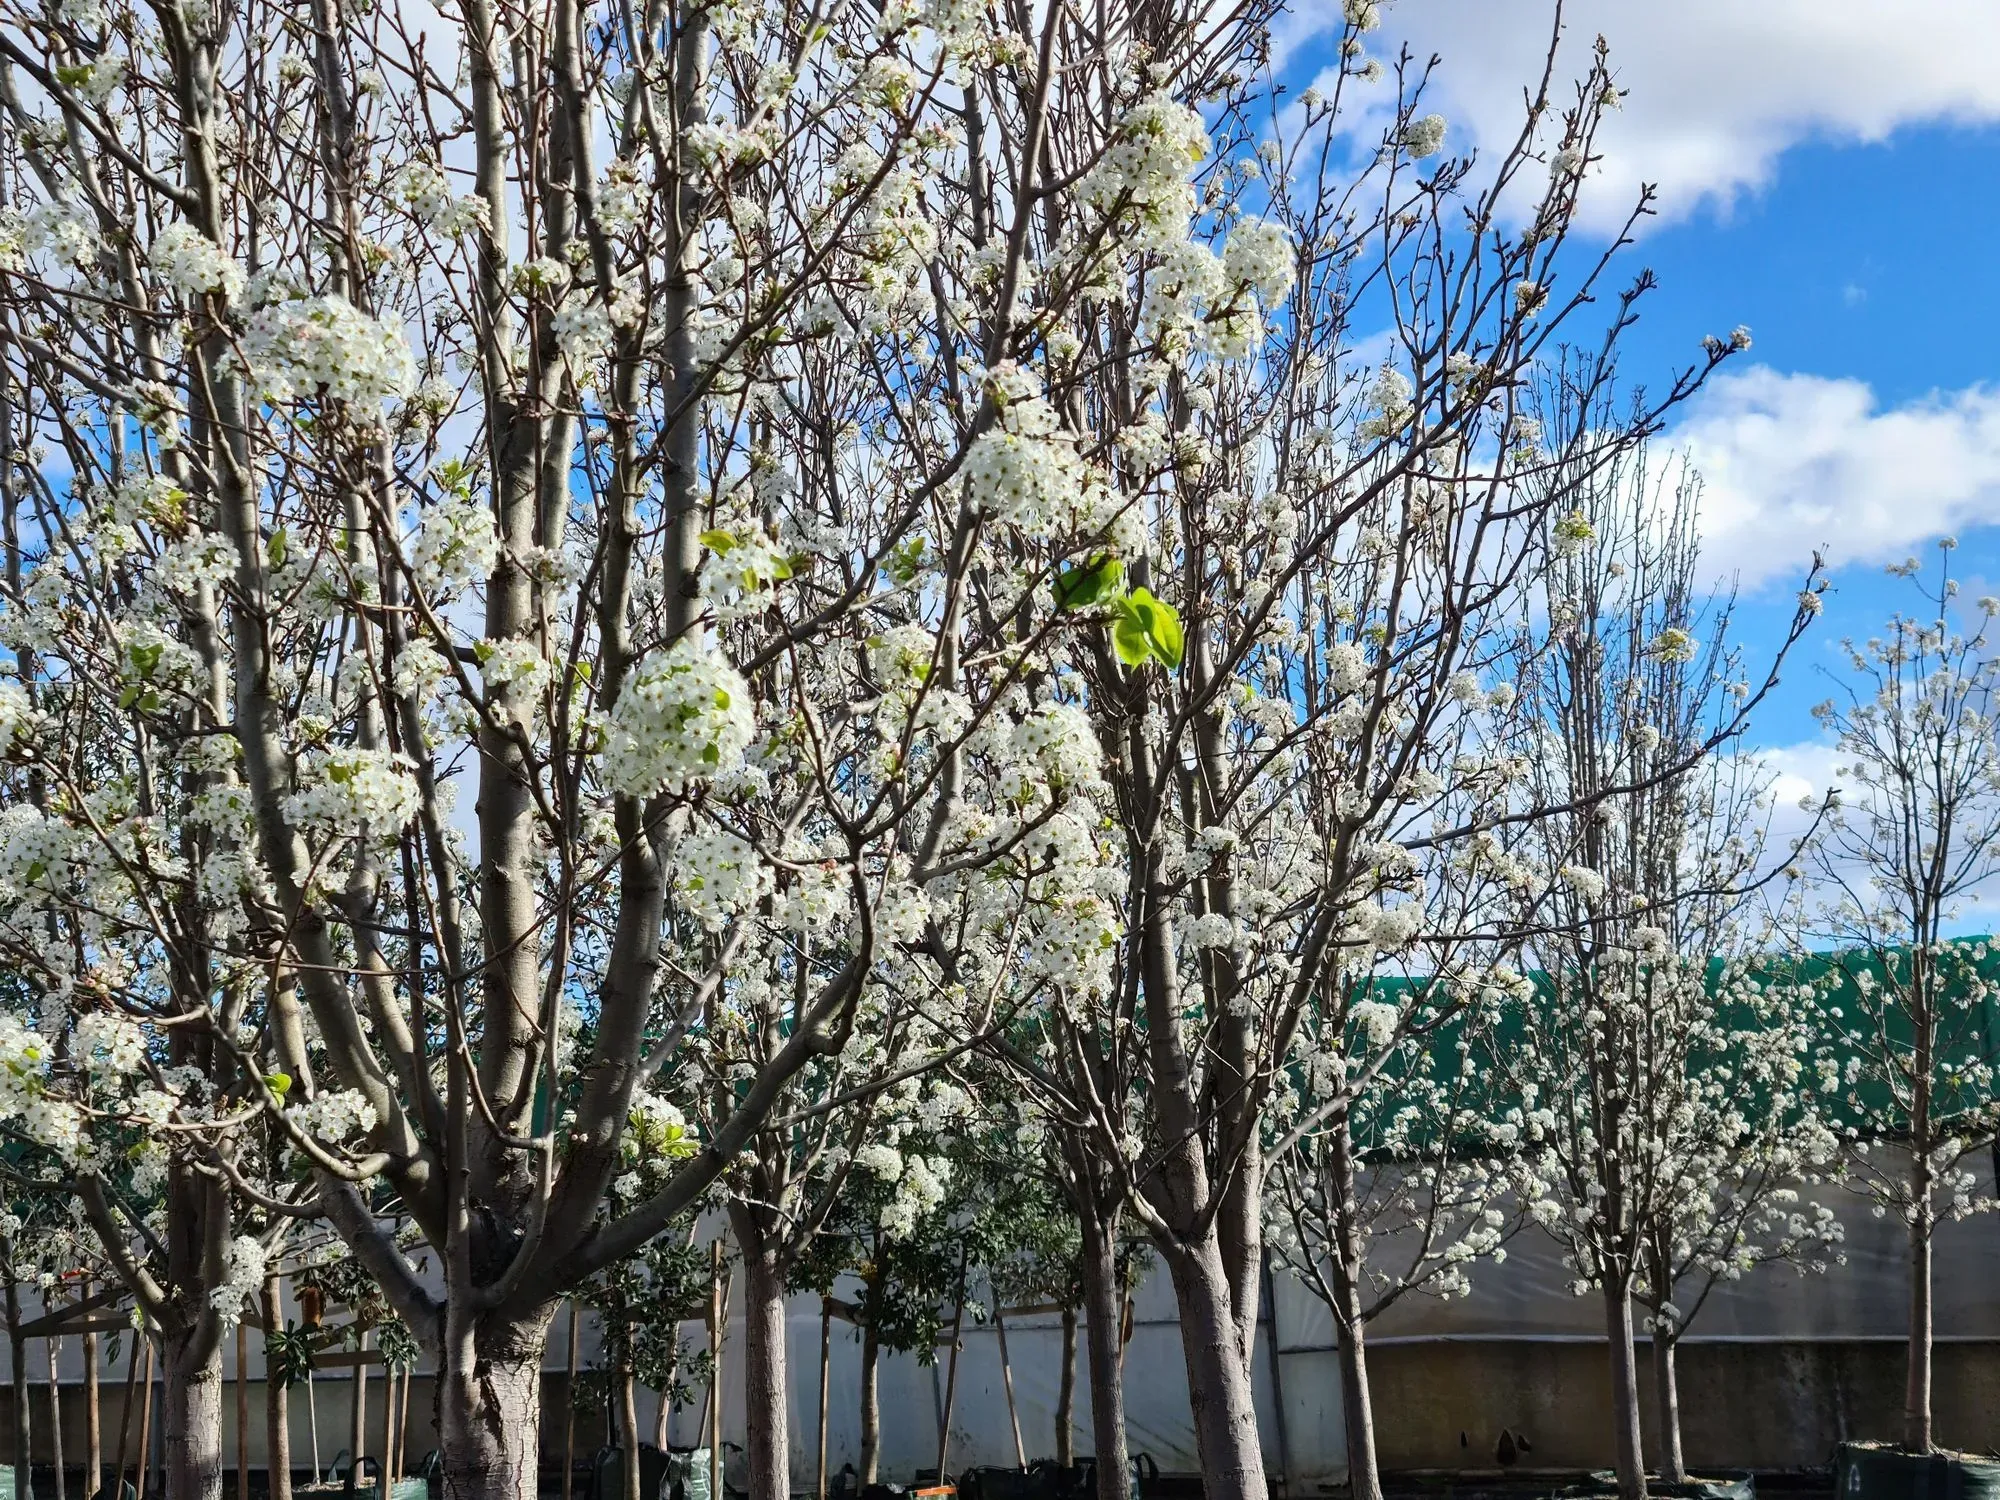 Discover interesting Chanticleer pear trees facts here at Kidadl.